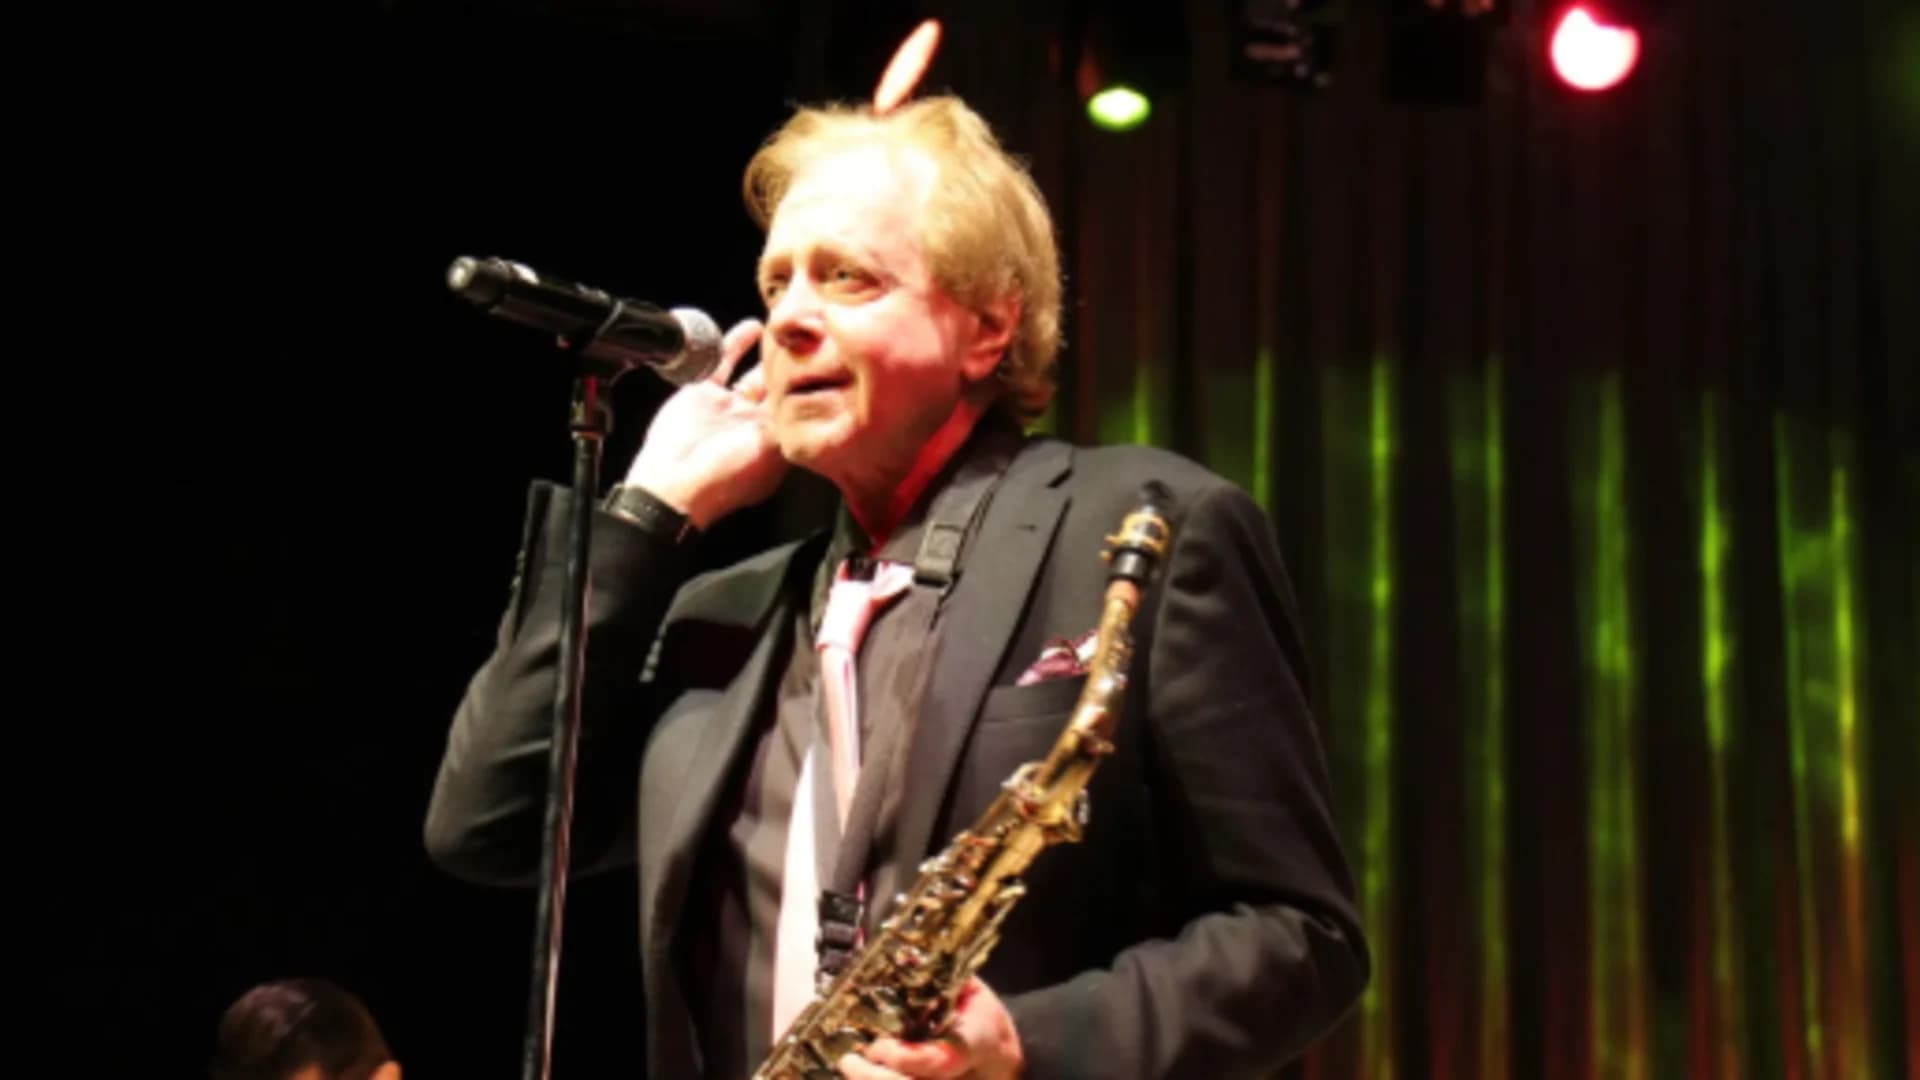 Singer Eddie Money says he has stage 4 esophageal cancer